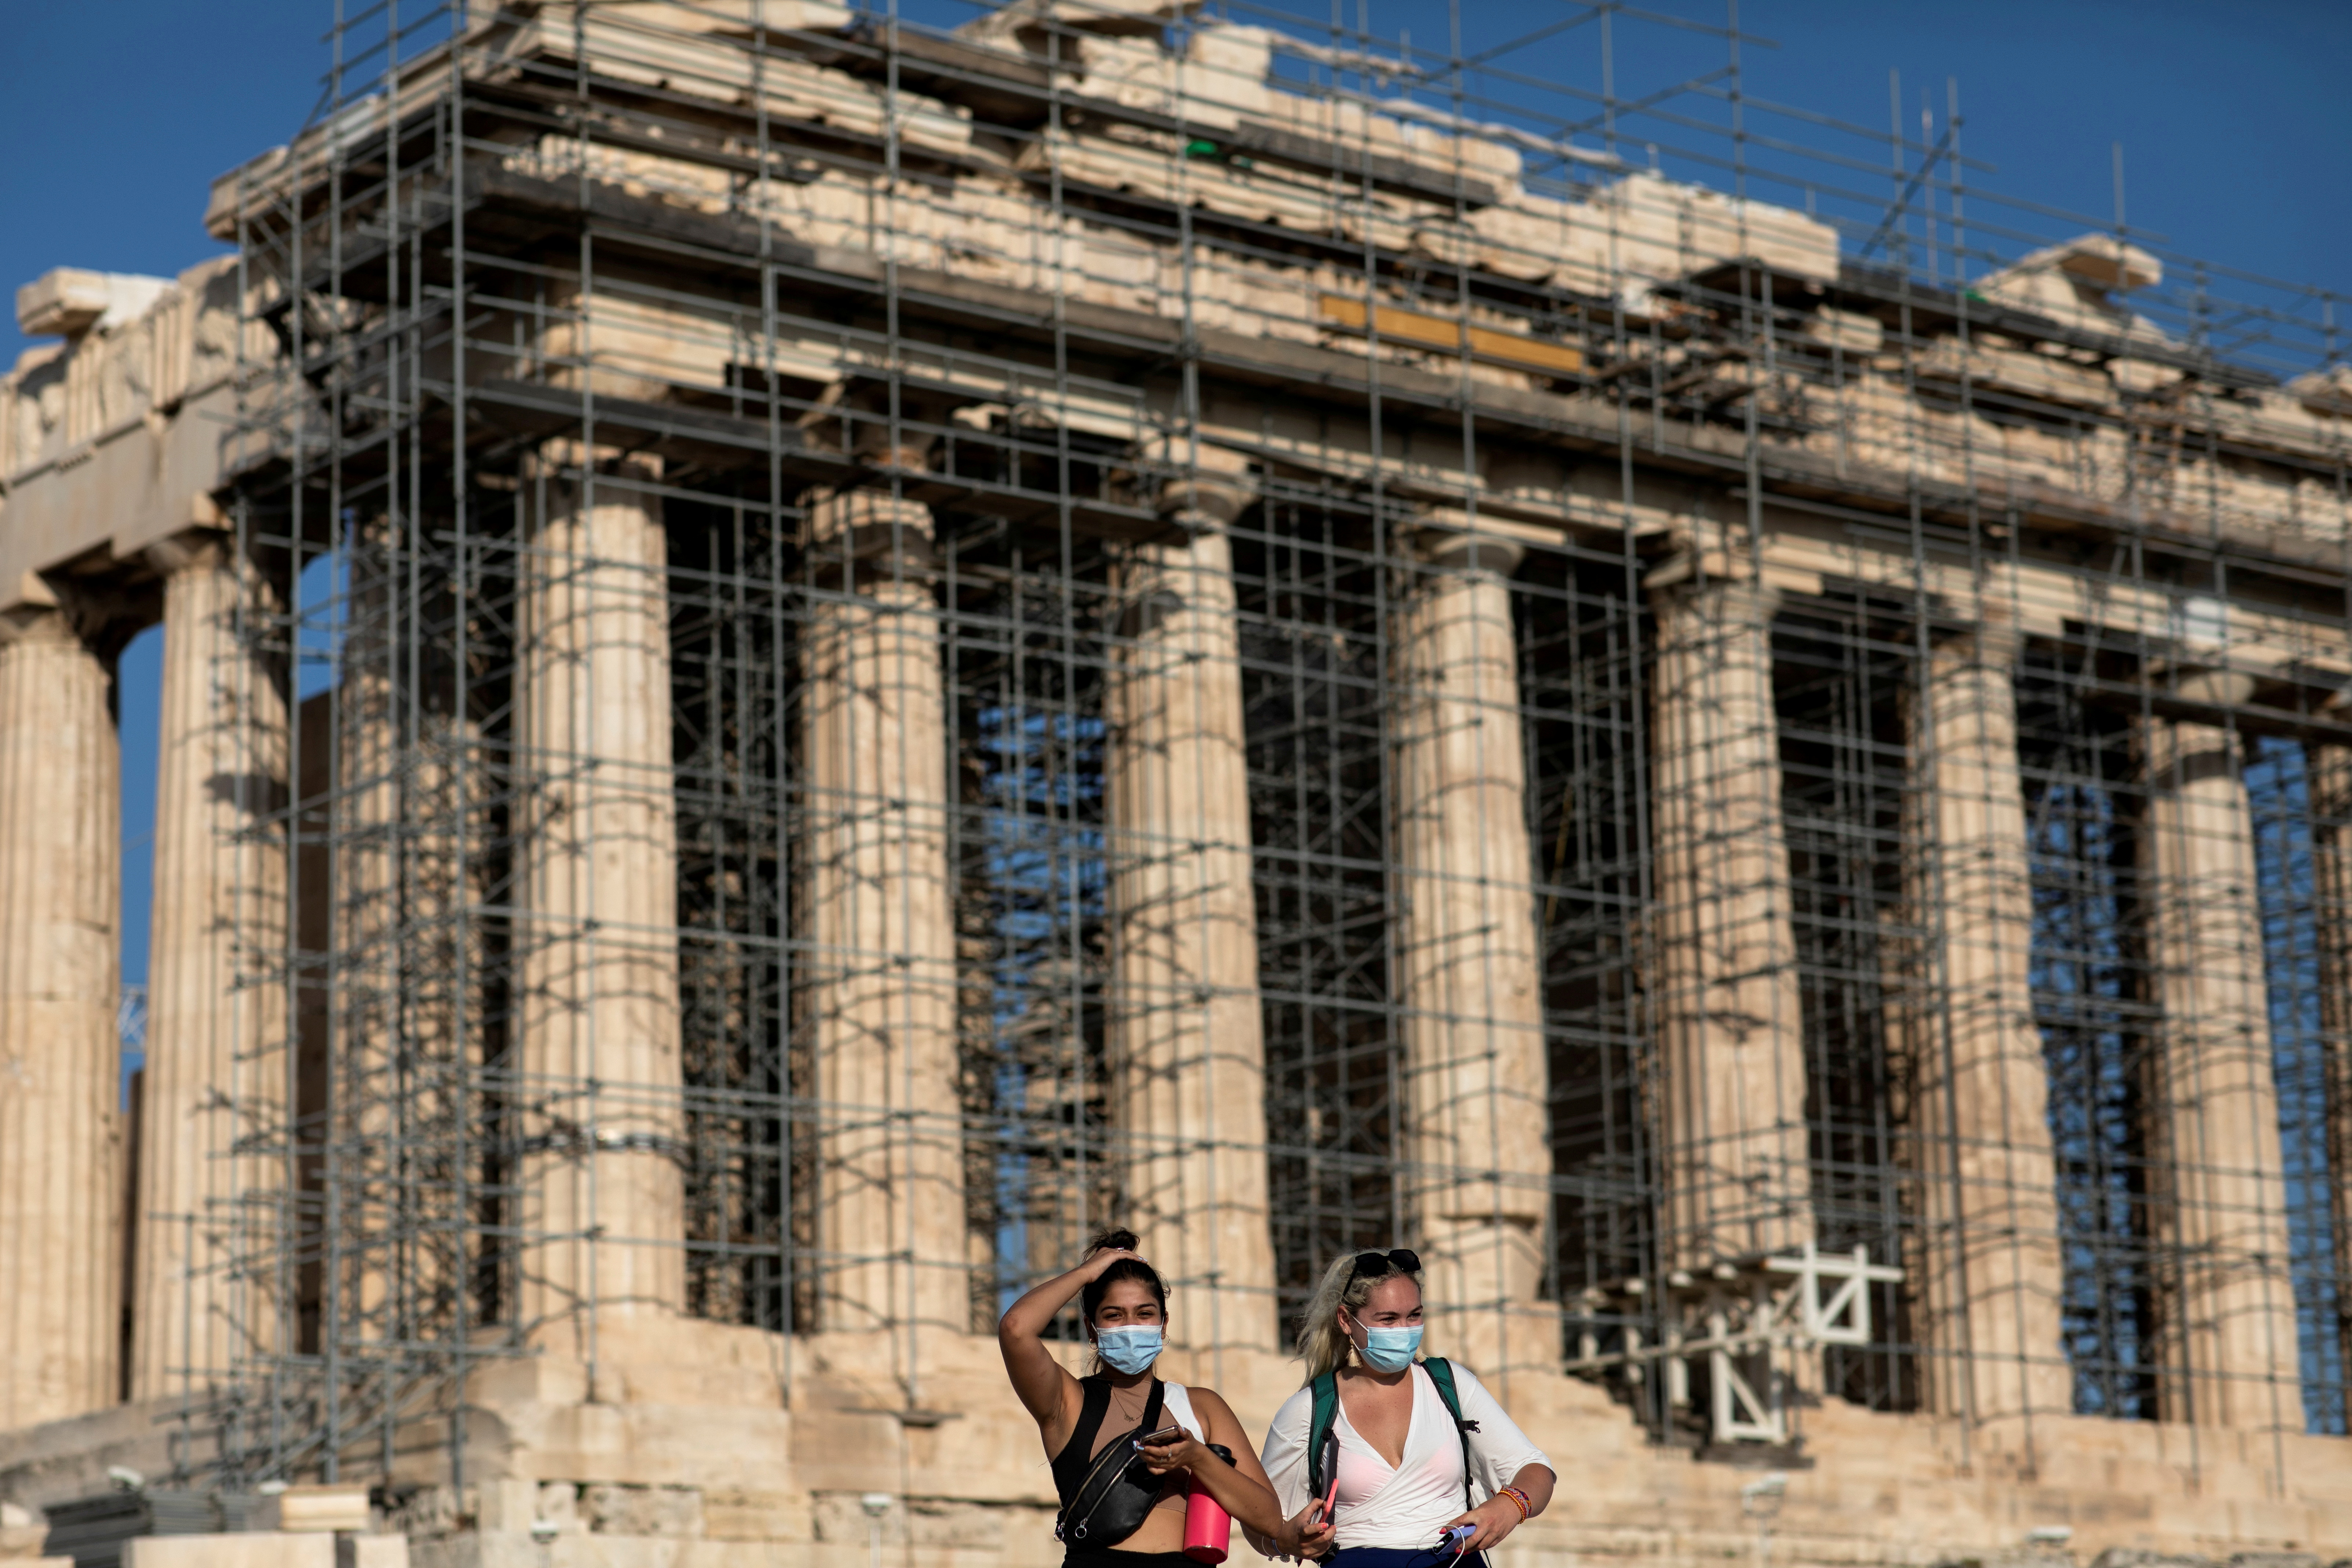 Two women wearing protective face masks amid COVID-19 pandemic visit the Parthenon temple atop the Acropolis hill in Athens, Greece, June 8, 2021. REUTERS/Alkis Konstantinidis/File Photo